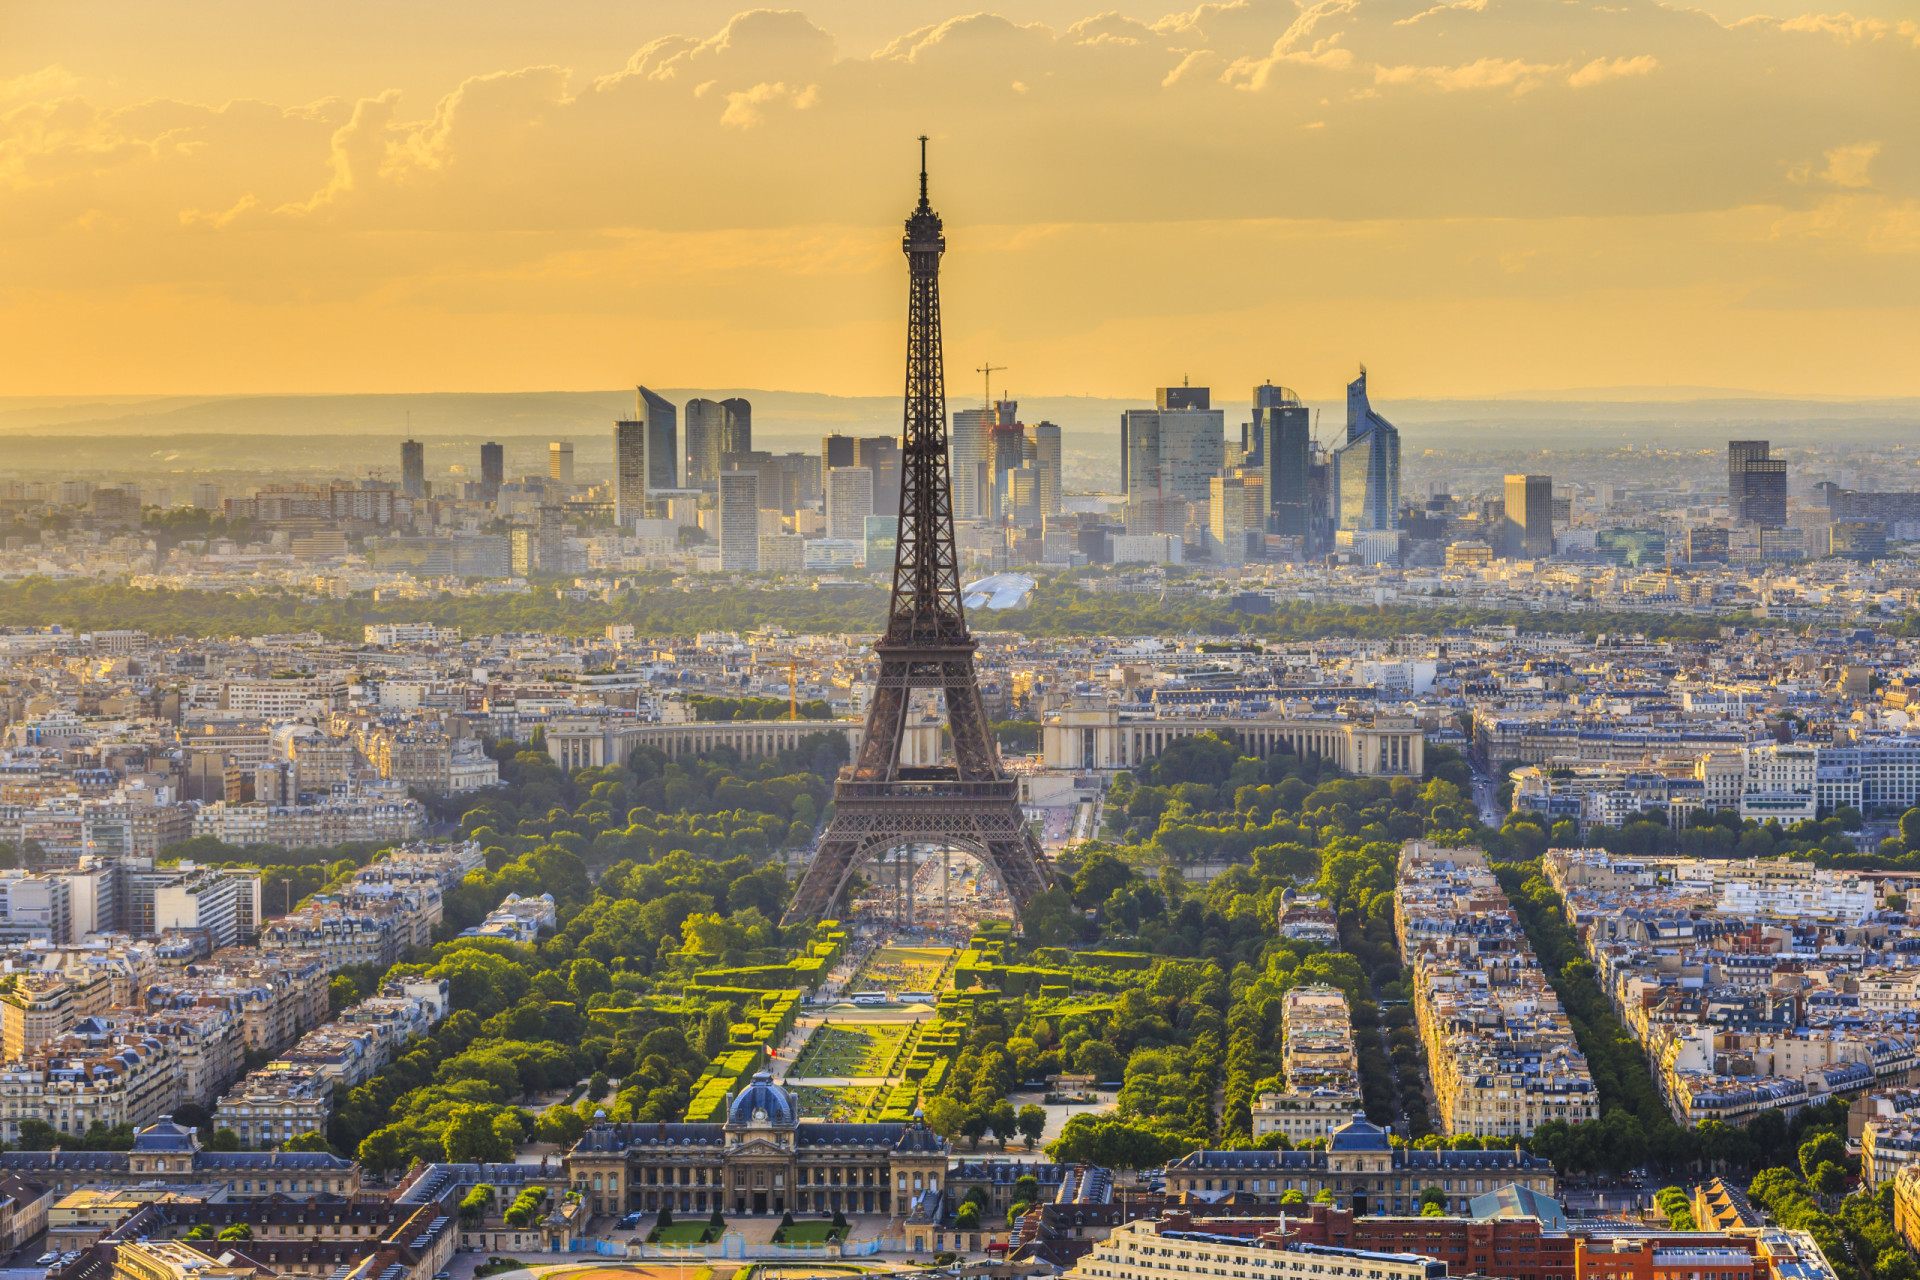 <p>The French capital is certainly worthy of its place as the second-most Googled city. Paris is also known as the "City of Light," and has had a leading role in the arts and sciences for many centuries.</p><p><a href="https://www.msn.com/en-us/community/channel/vid-7xx8mnucu55yw63we9va2gwr7uihbxwc68fxqp25x6tg4ftibpra?cvid=94631541bc0f4f89bfd59158d696ad7e">Follow us and access great exclusive content every day</a></p>